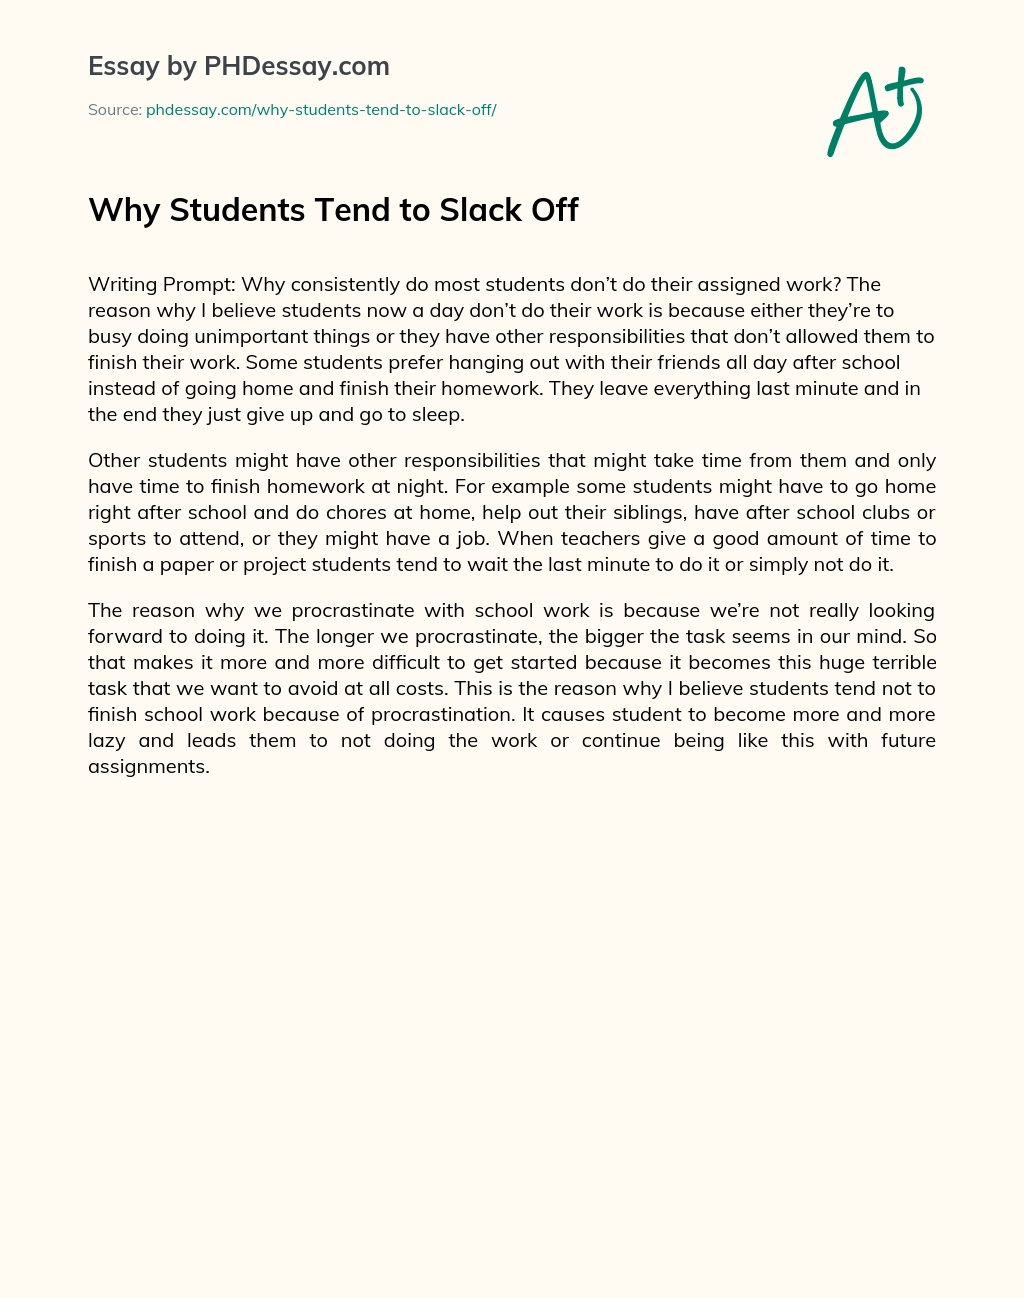 Why Students Tend to Slack Off essay